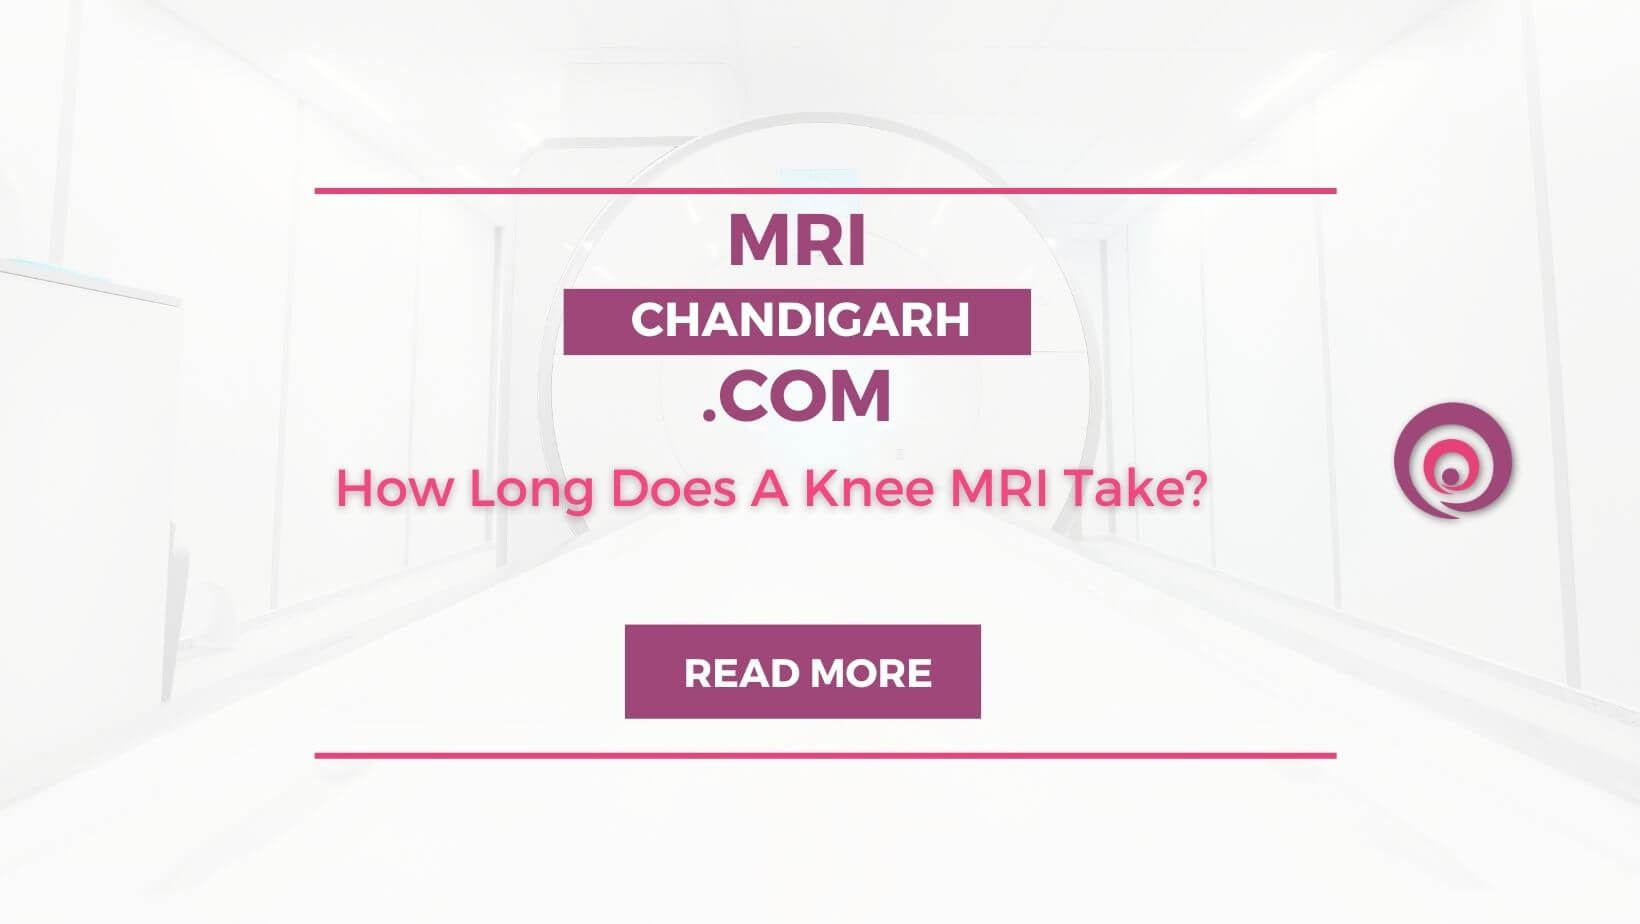 How Long Does A Knee MRI Take?